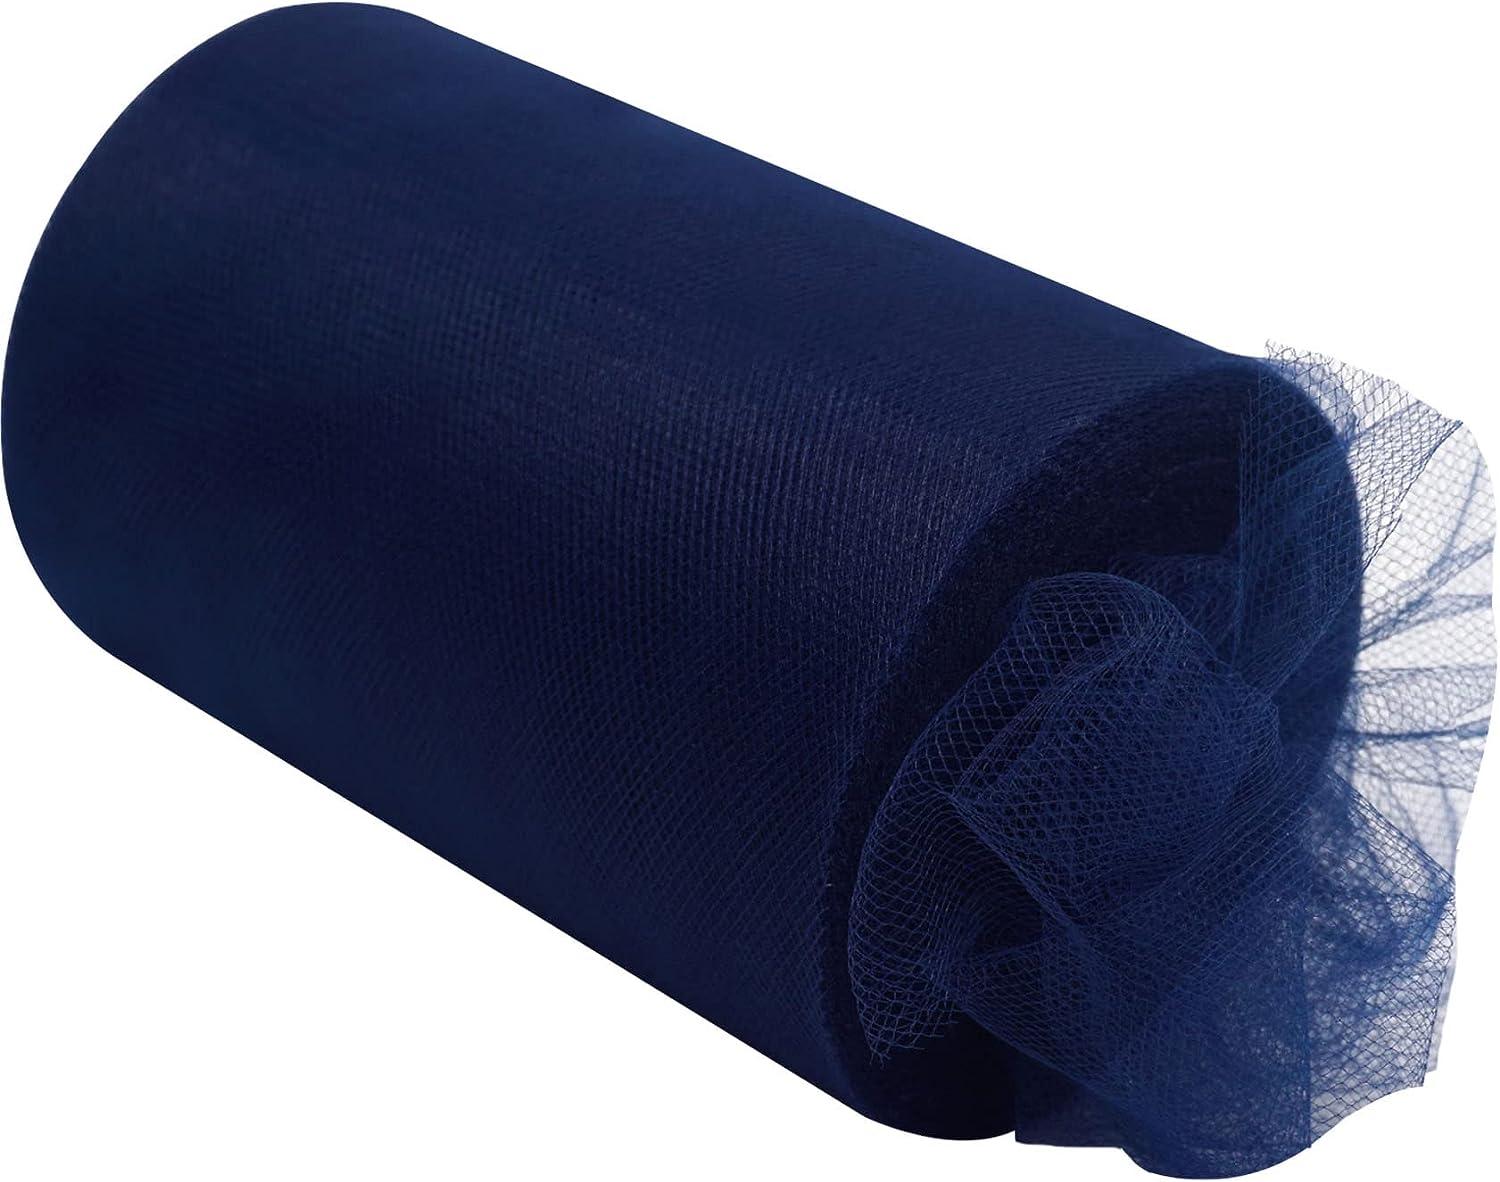 Navy Blue Tulle Fabric Rolls 6 Inch by 200 Yards (600 feet) Fabric